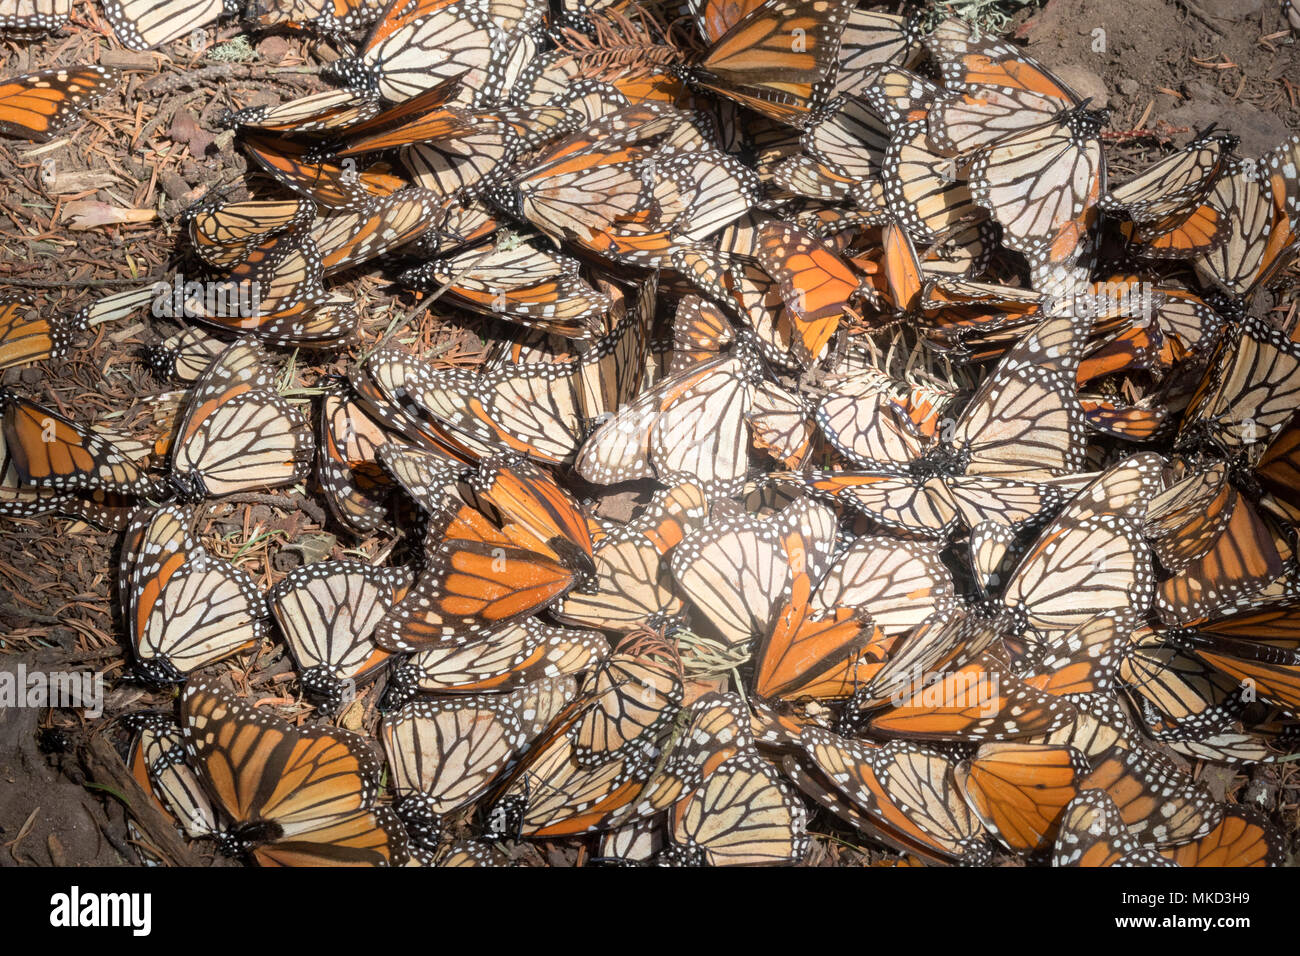 Monarch butterfly (Danaus plexippus), Butterflies died during the wintering period from November to March in oyamel pine (Abies religiosa) forest, butterflies gathering to drink water and take up mineral, El Rosario, Reserve of the Biosfera Monarca, Angangueo, State of Michoacan, Mexico Stock Photo